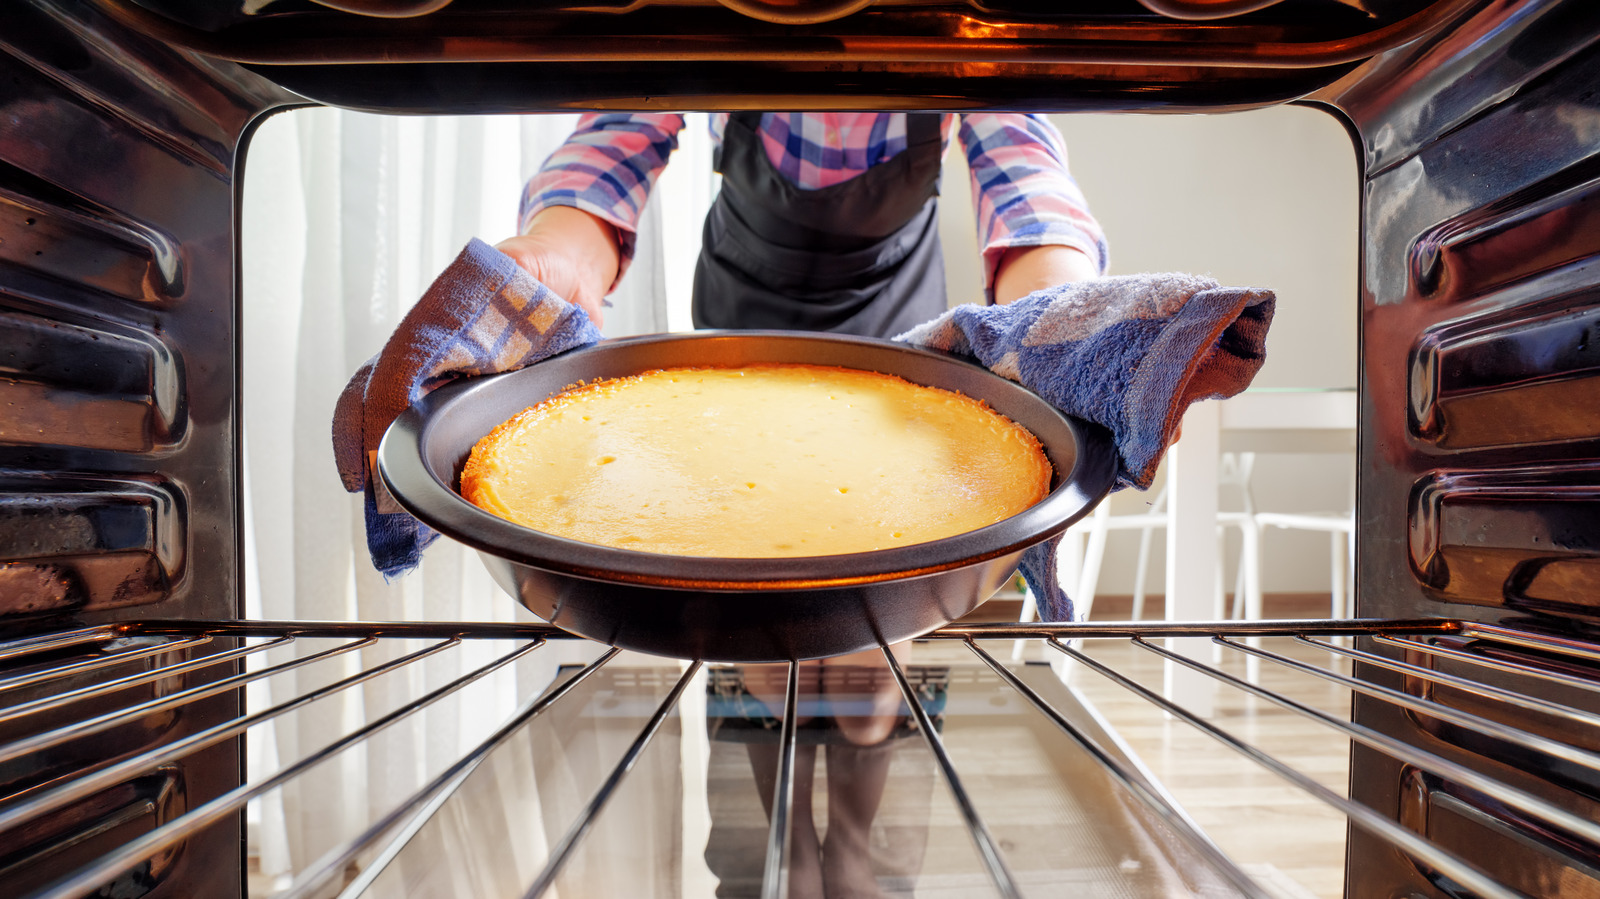 Why You Shouldn't Use Your Oven's Convection Setting For Baking Cake